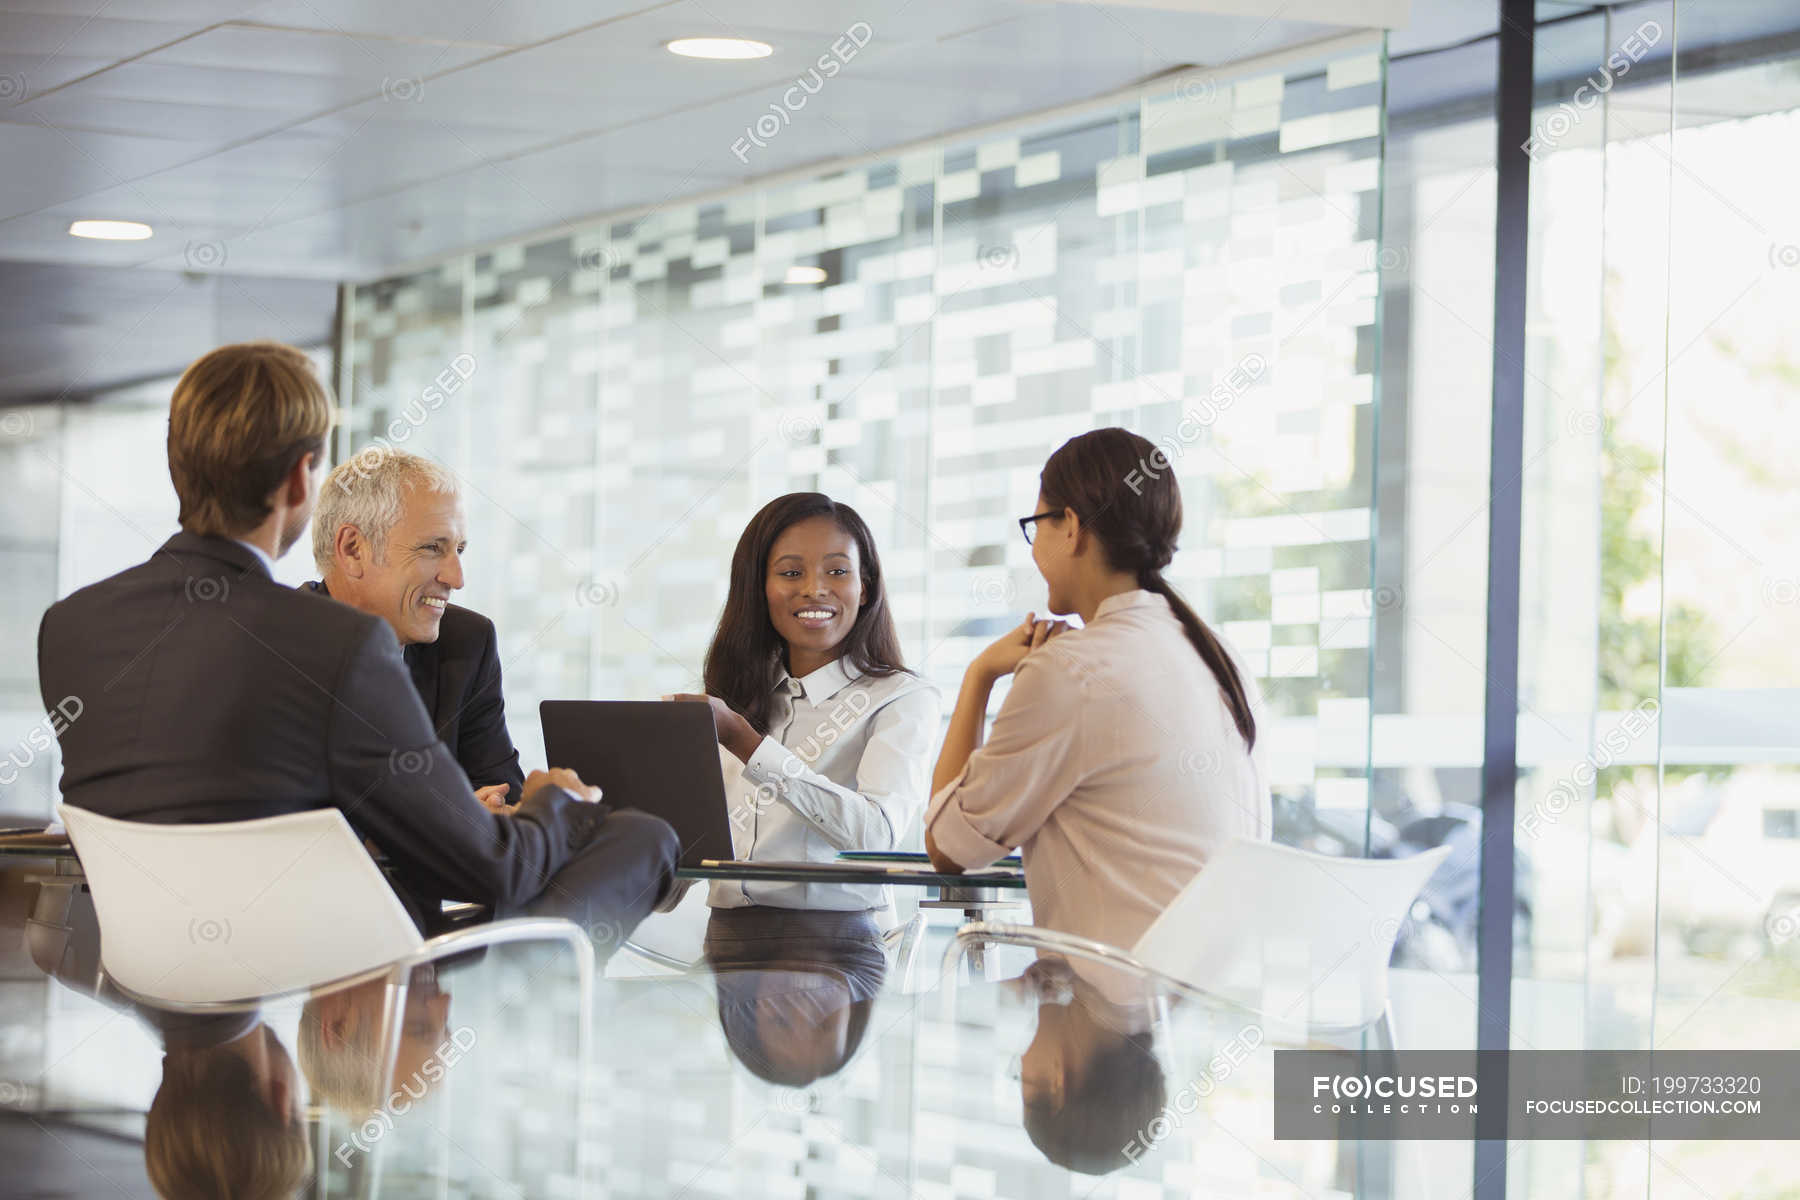 Business people talking in meeting in office building — connection,  communication - Stock Photo | #199733320